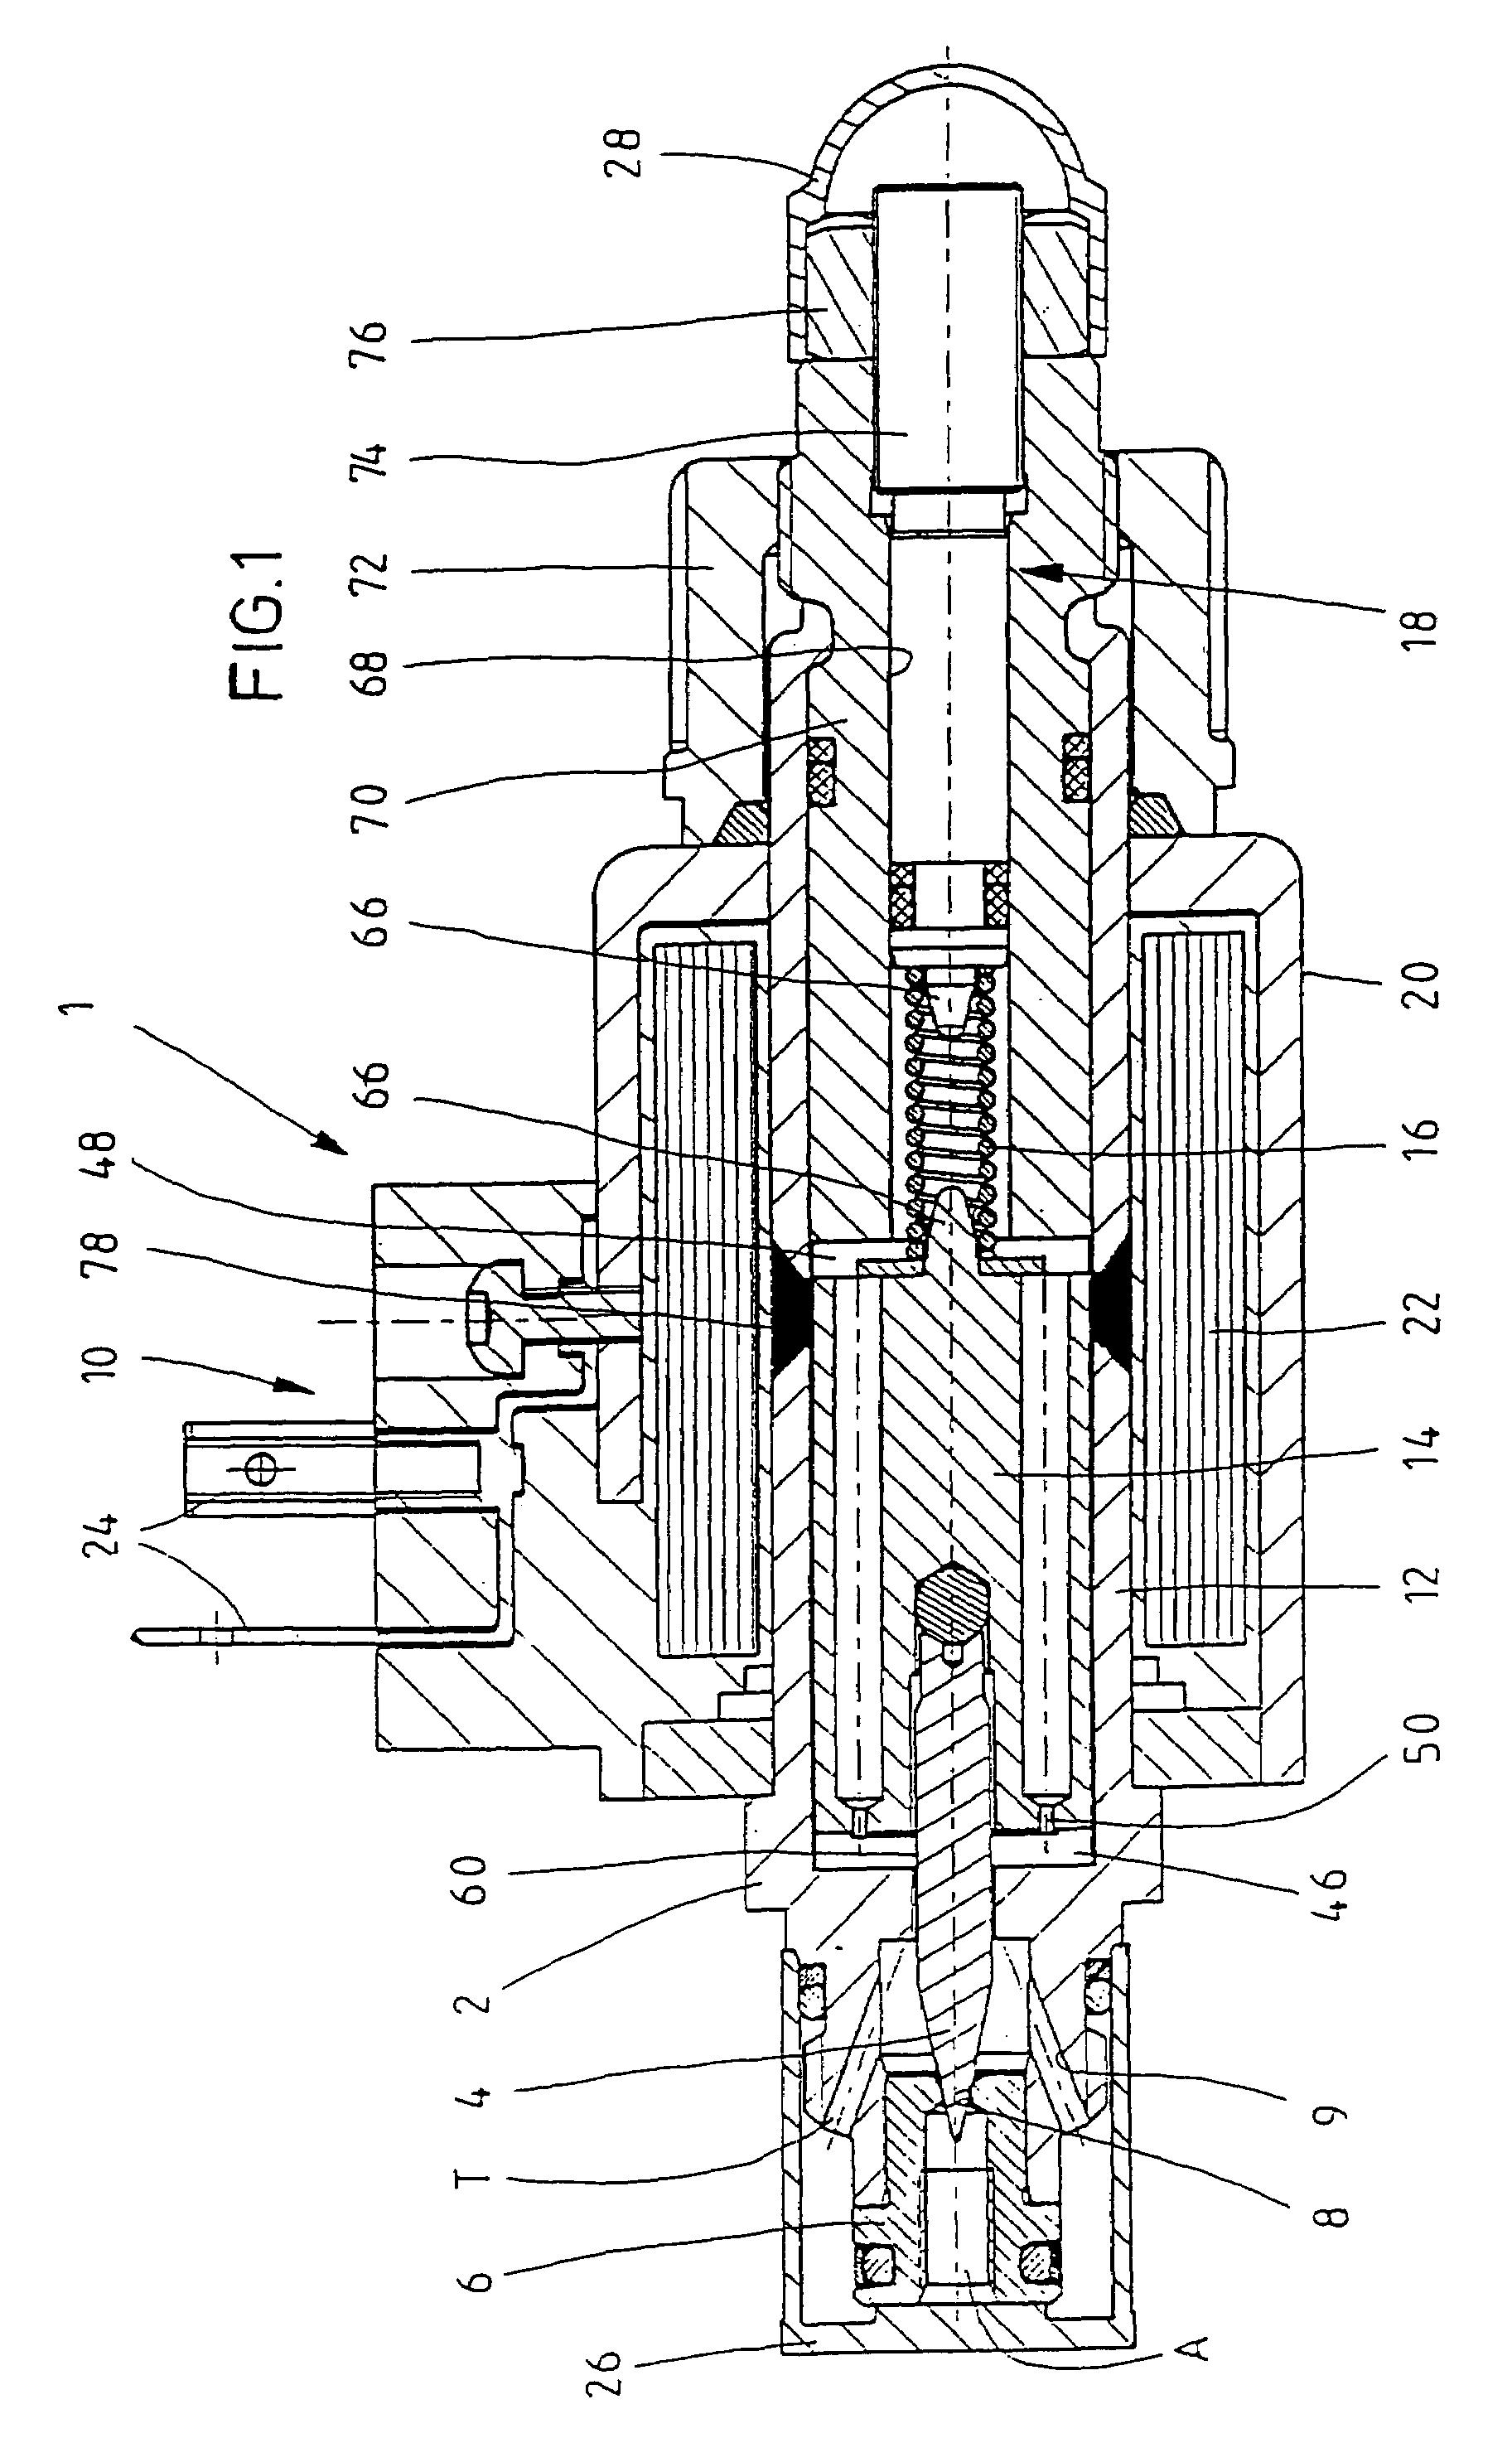 Directly controlled proportional pressure limiting valve